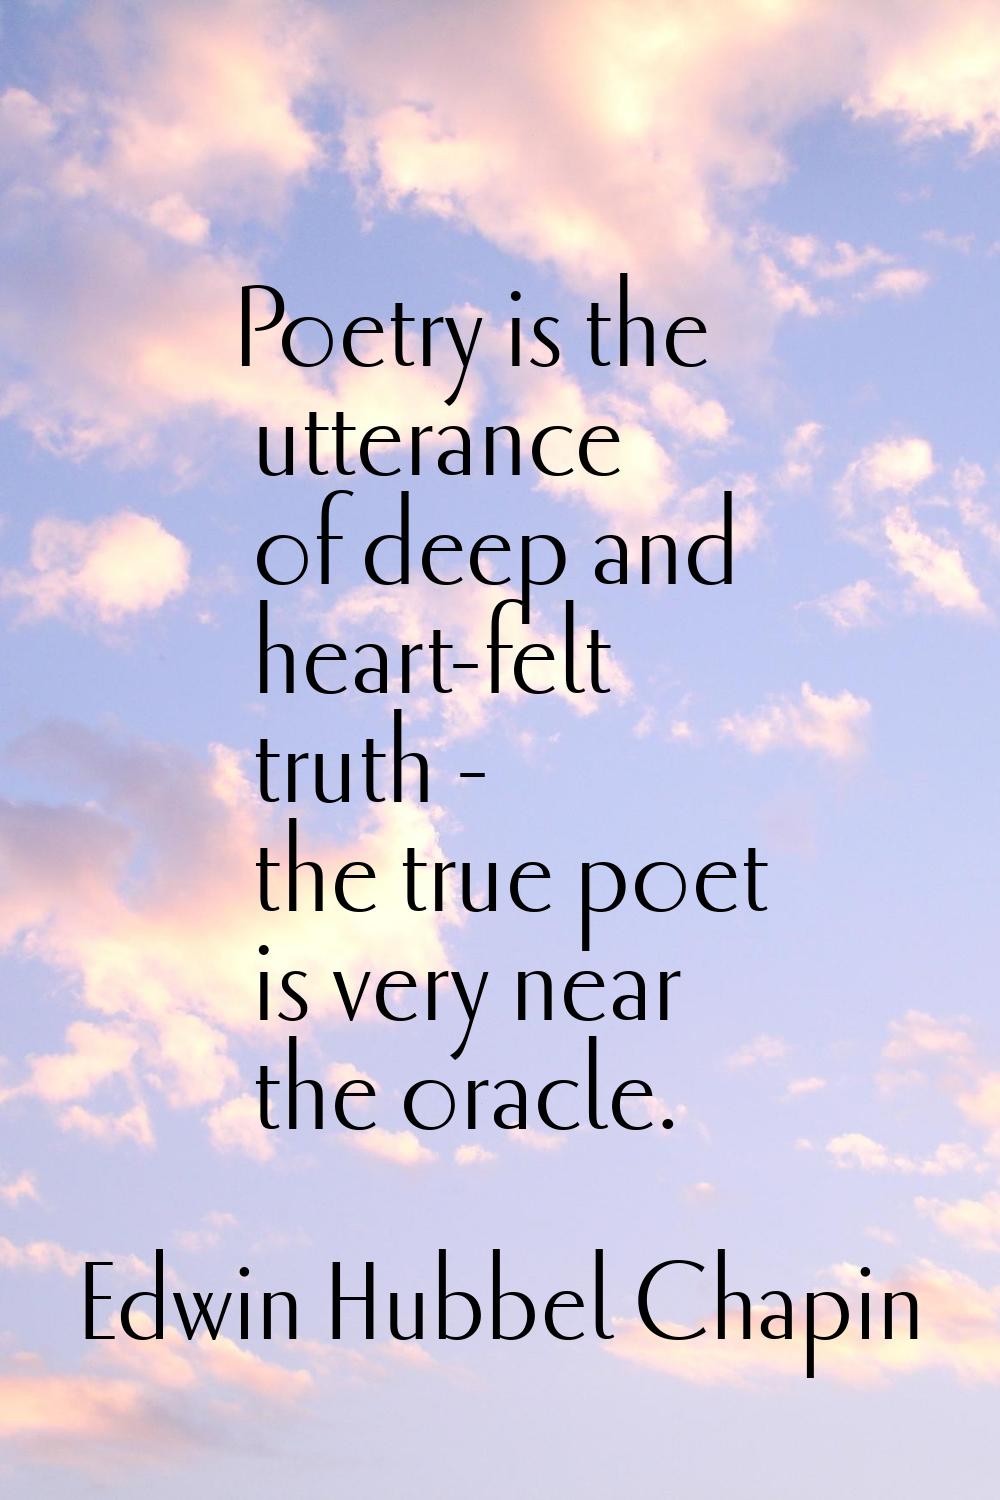 Poetry is the utterance of deep and heart-felt truth - the true poet is very near the oracle.